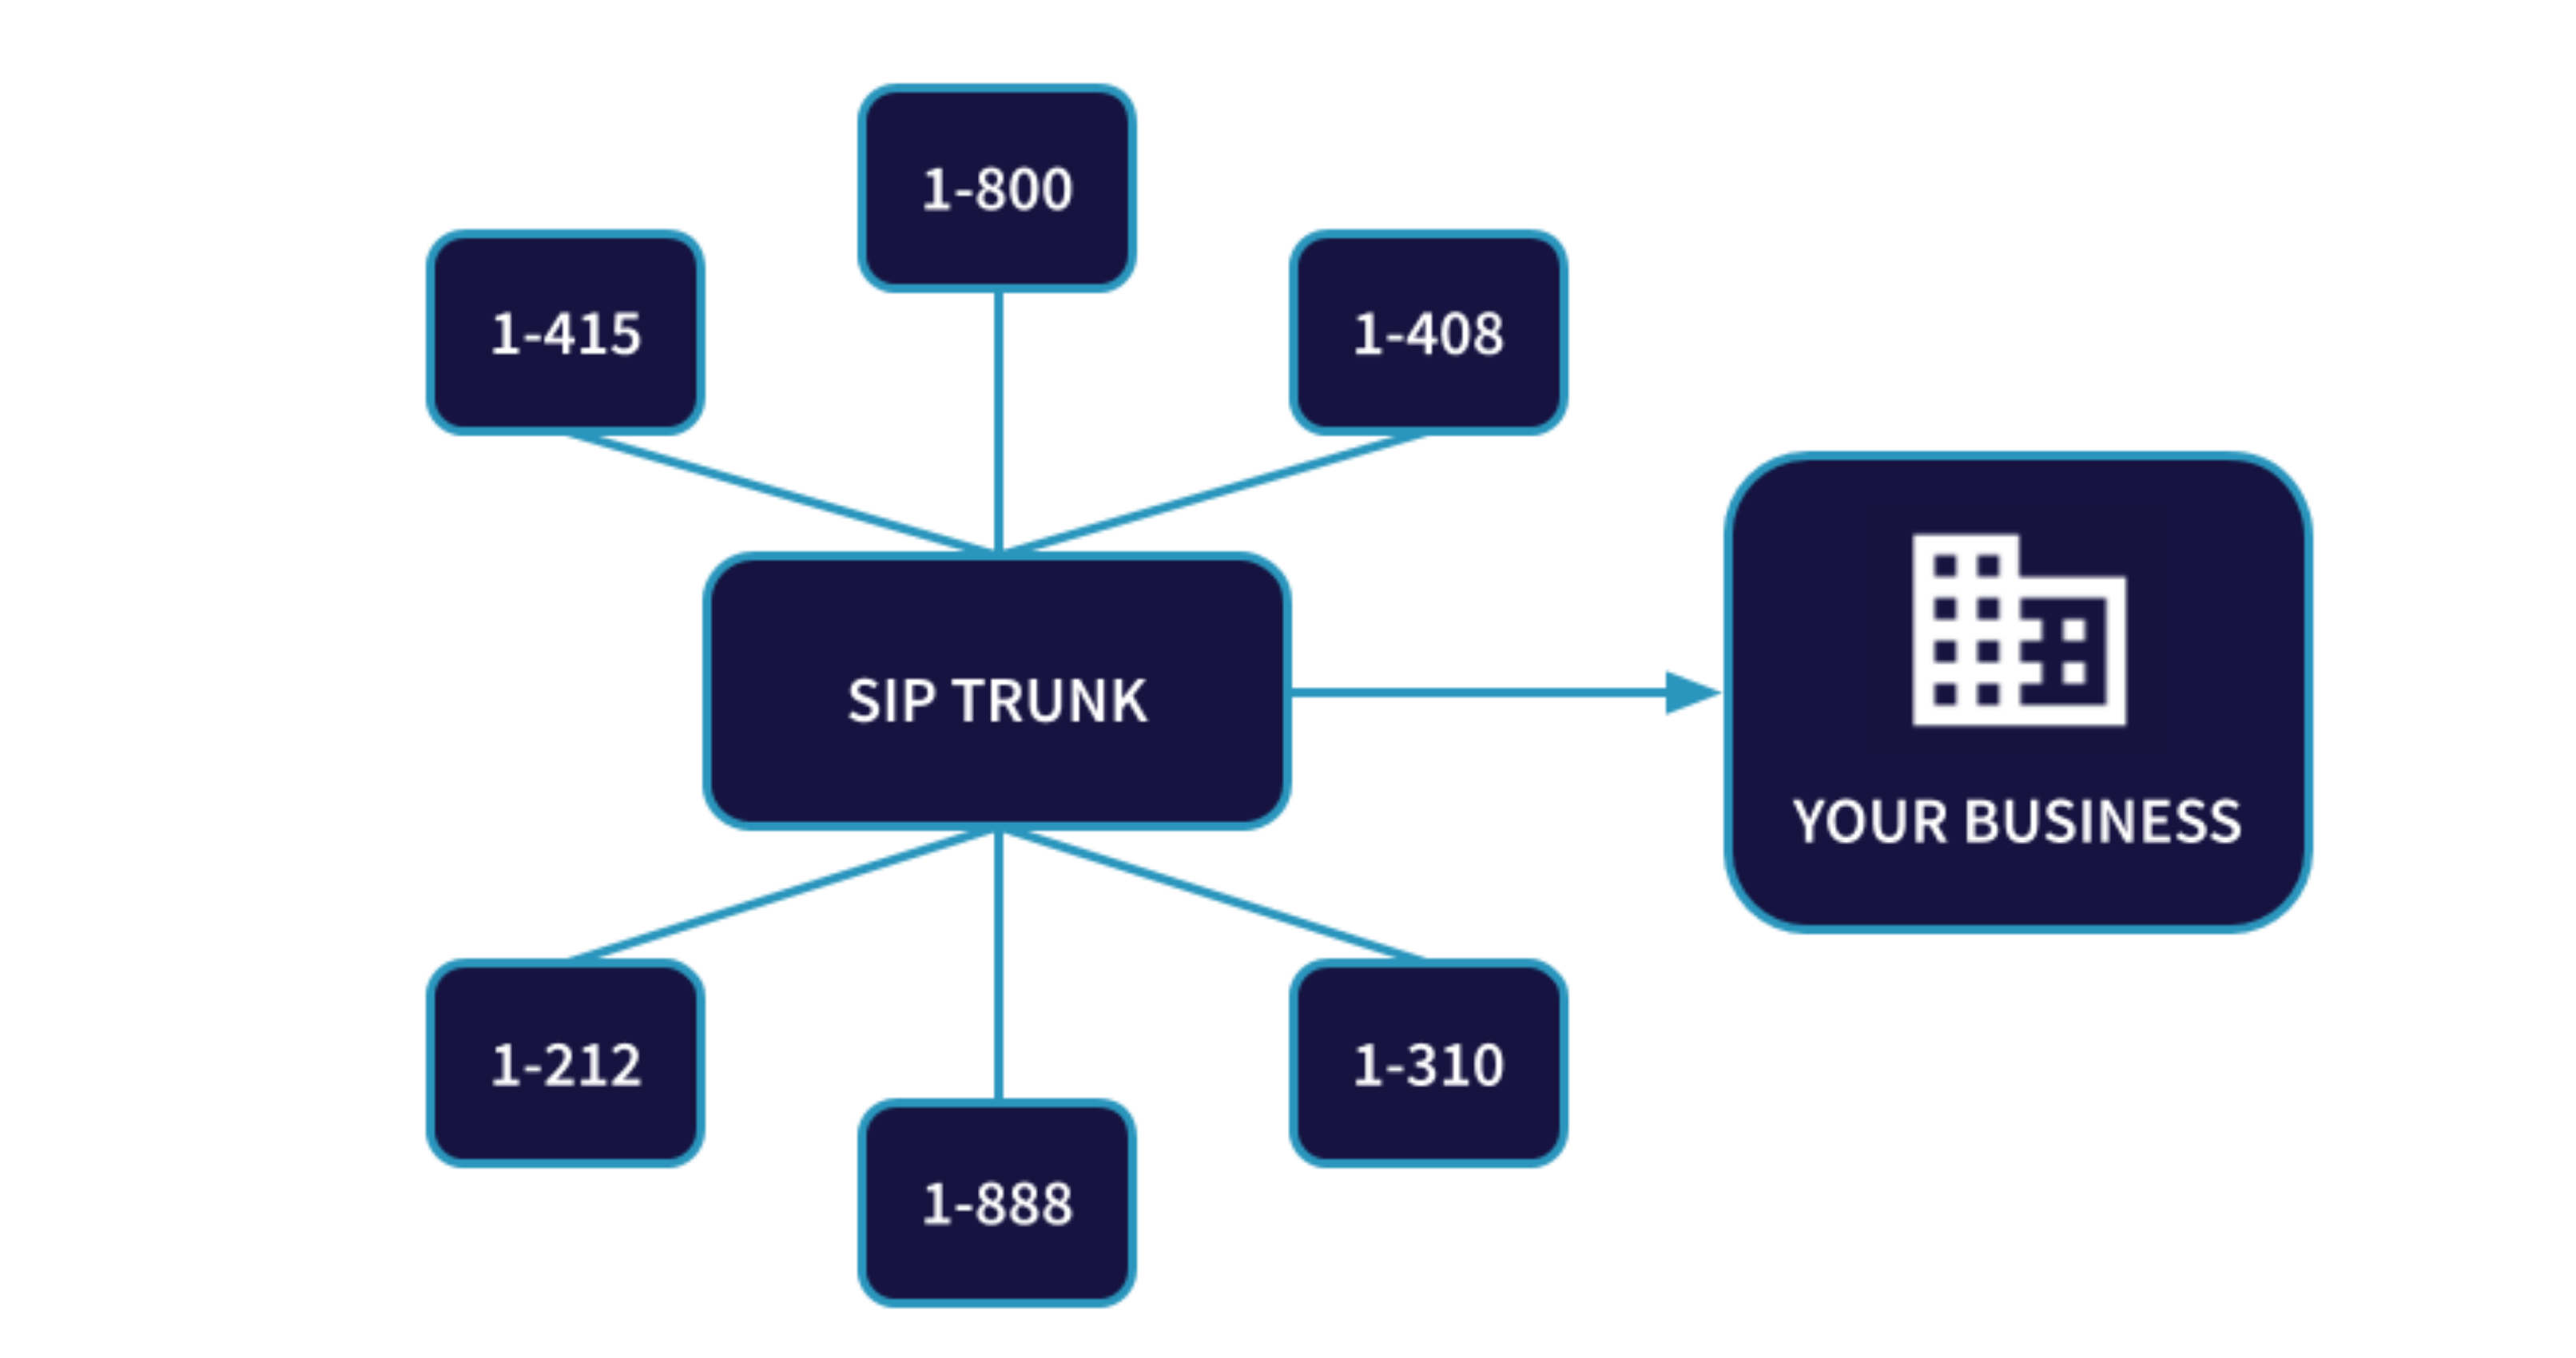 VirtualPBX SIP Trunking Diagram - Our SIP Trunking Pricing is Flexible and Predictable